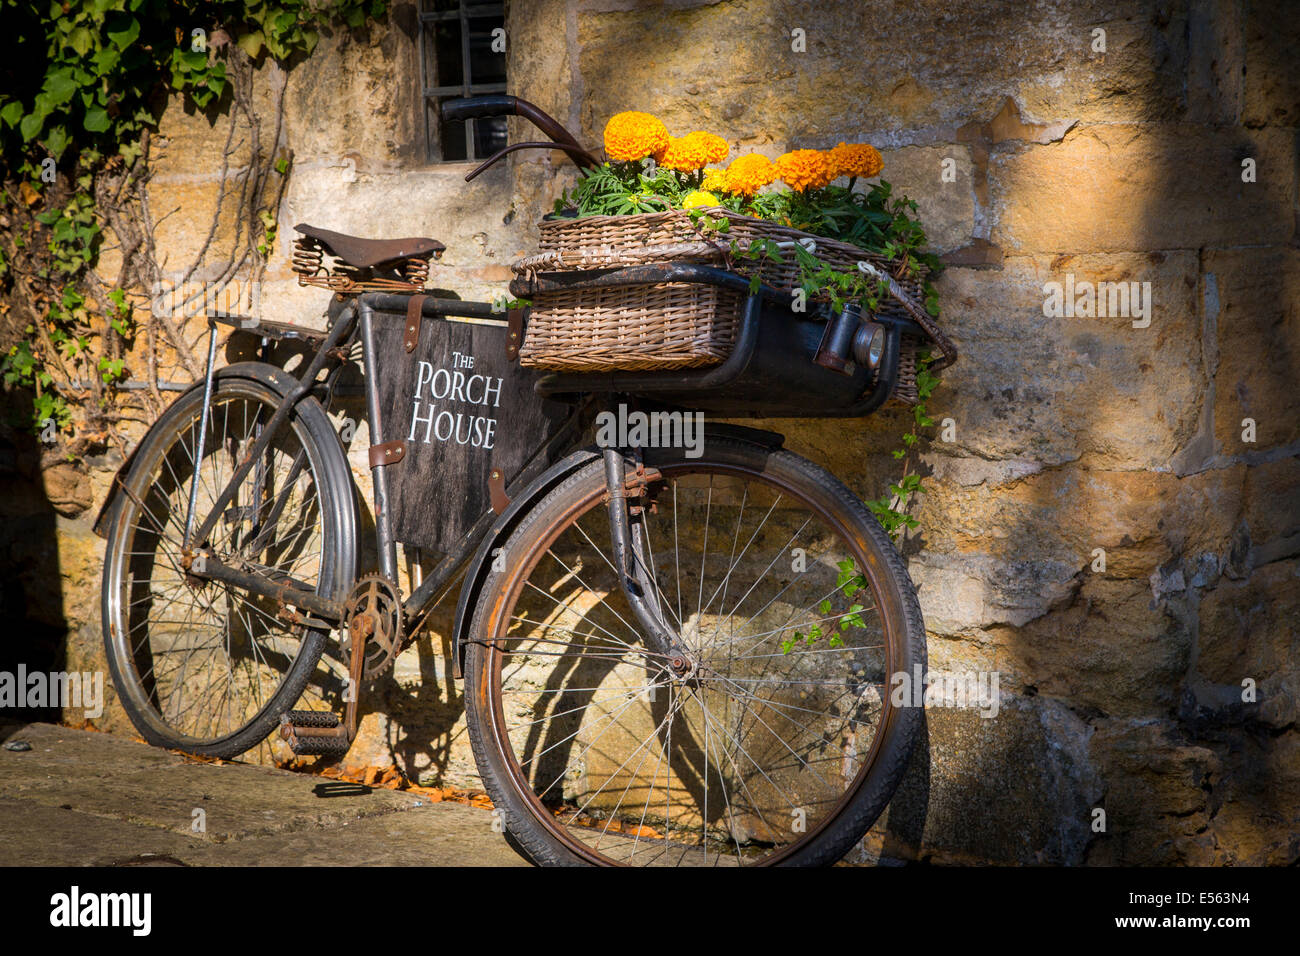 Bicycle parked outside The Porch House Pub and Inn, Stow-on-the-Wold, Gloucestershire, England Stock Photo